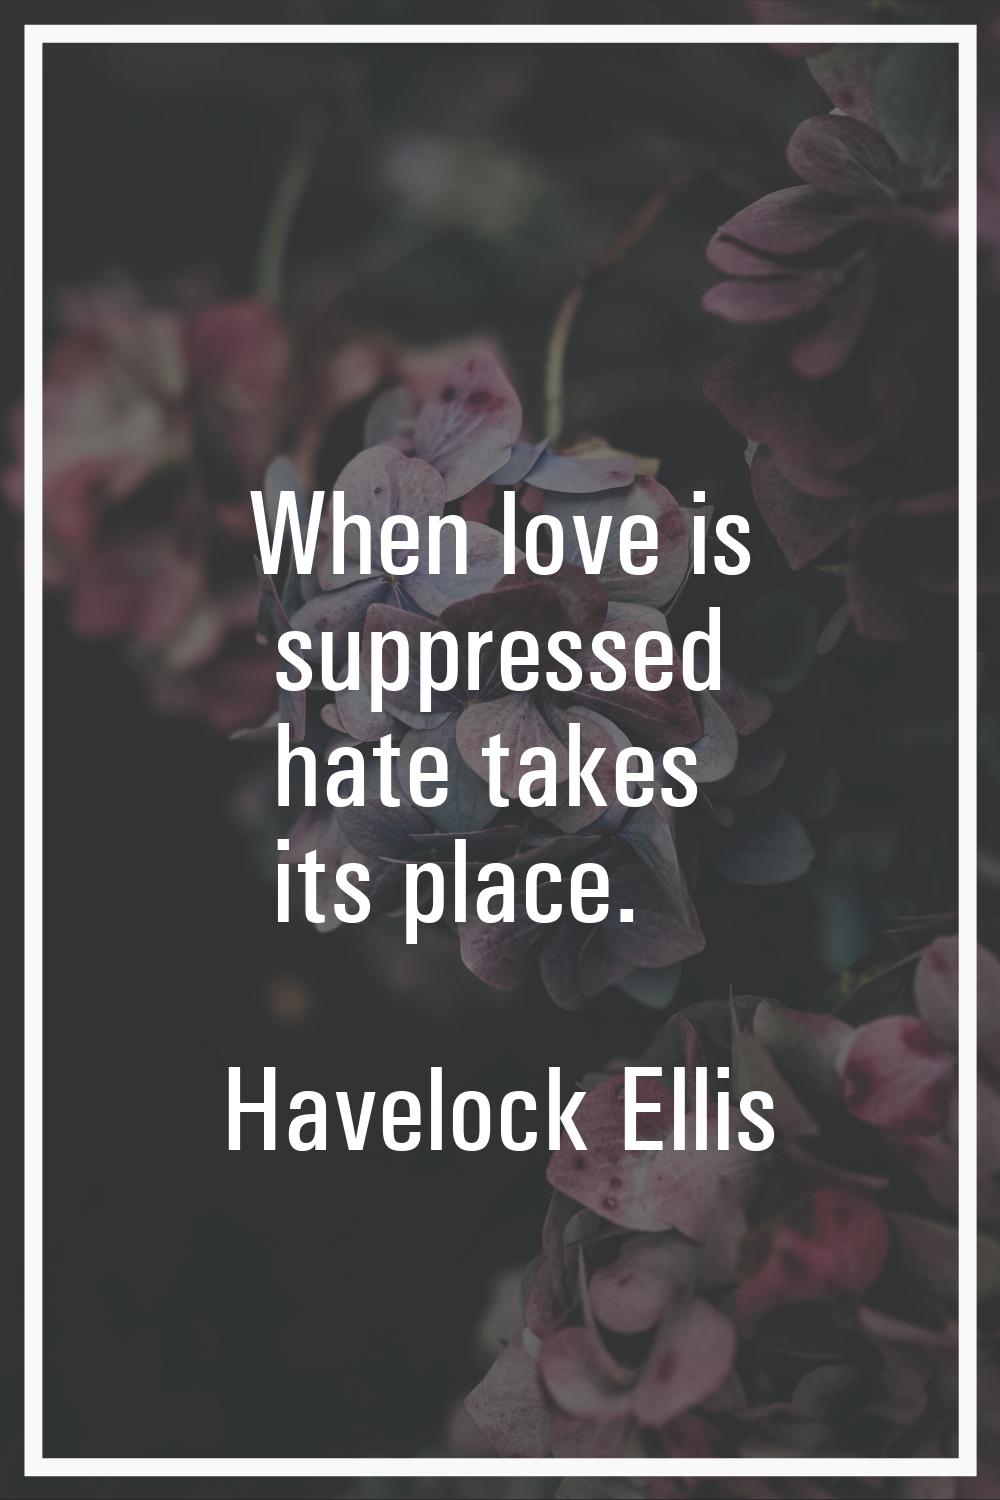 When love is suppressed hate takes its place.